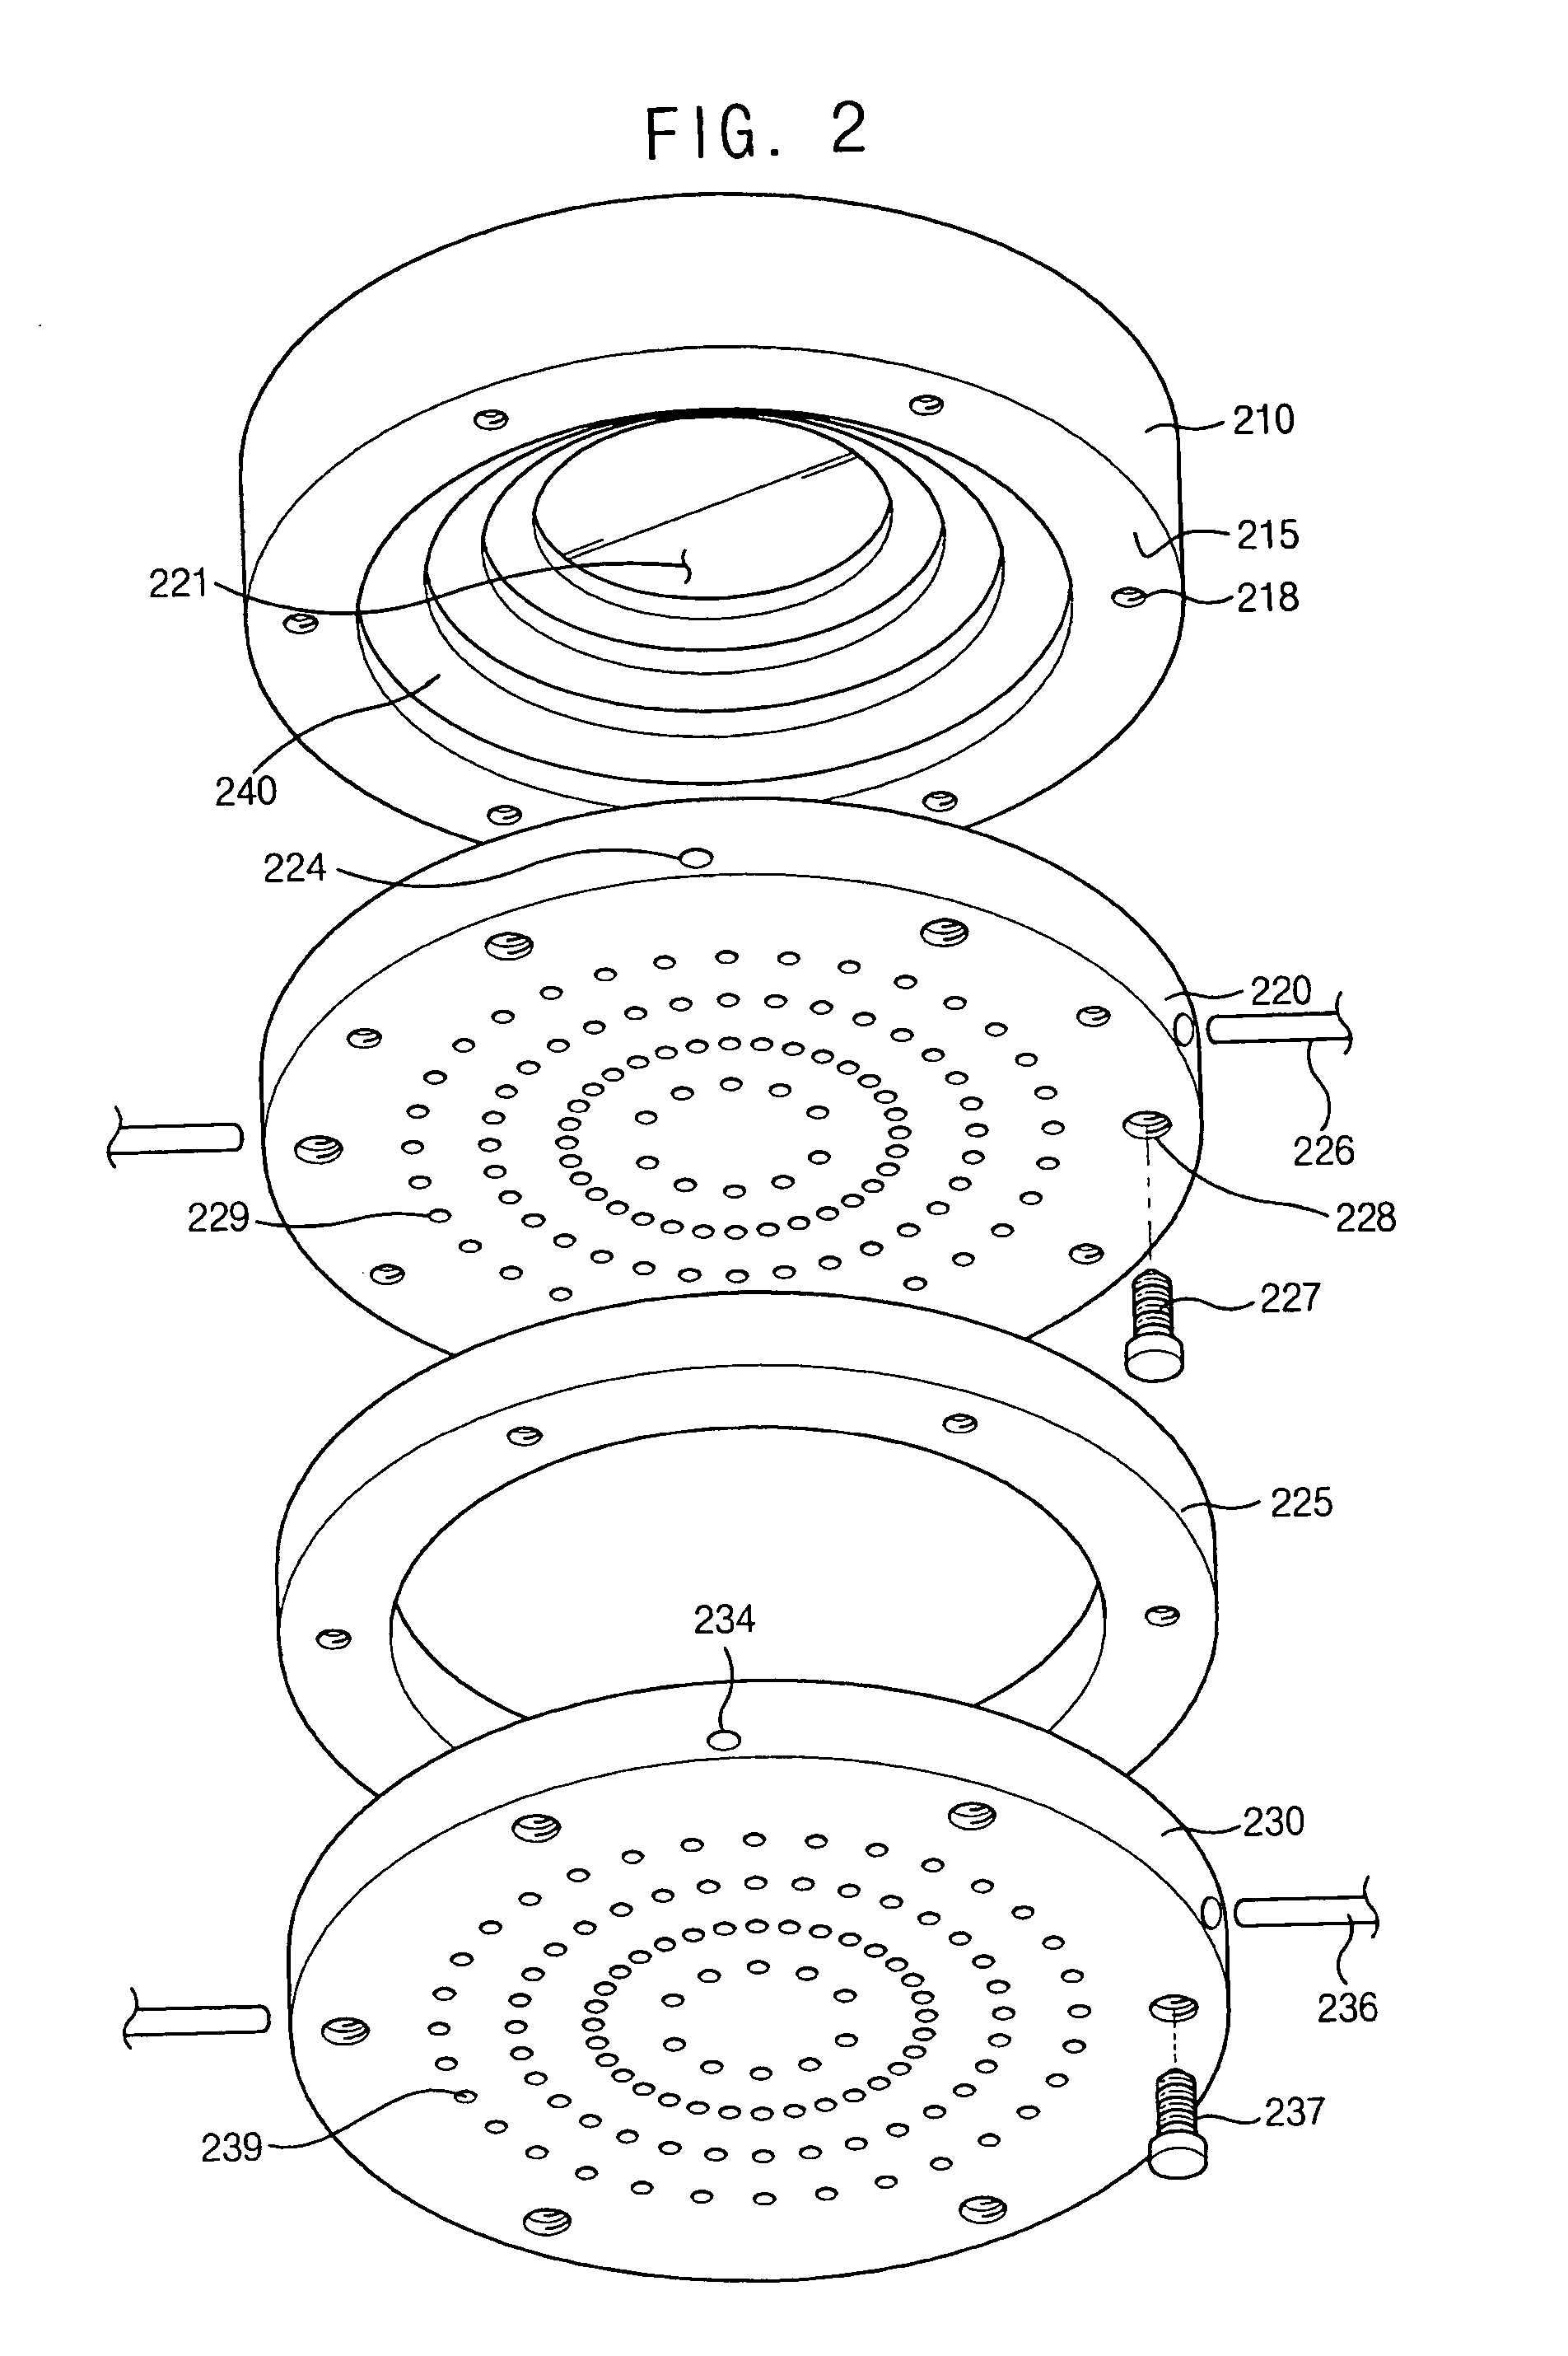 Showerheads for providing a gas to a substrate and apparatus and methods using the showerheads